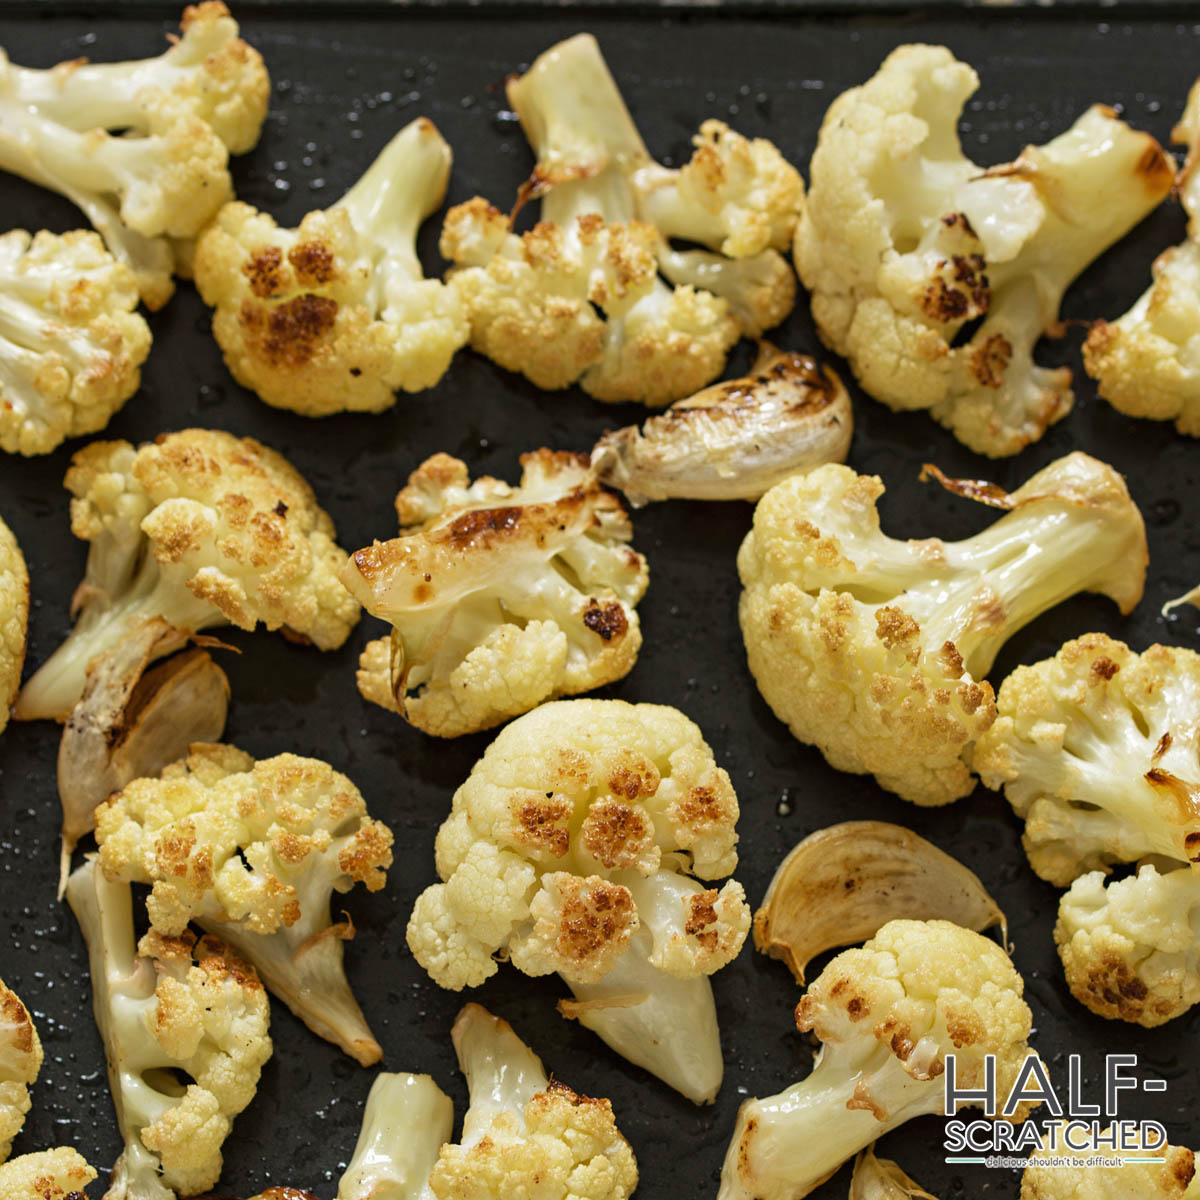 Roasted cauliflower florets in the oven at 400 F